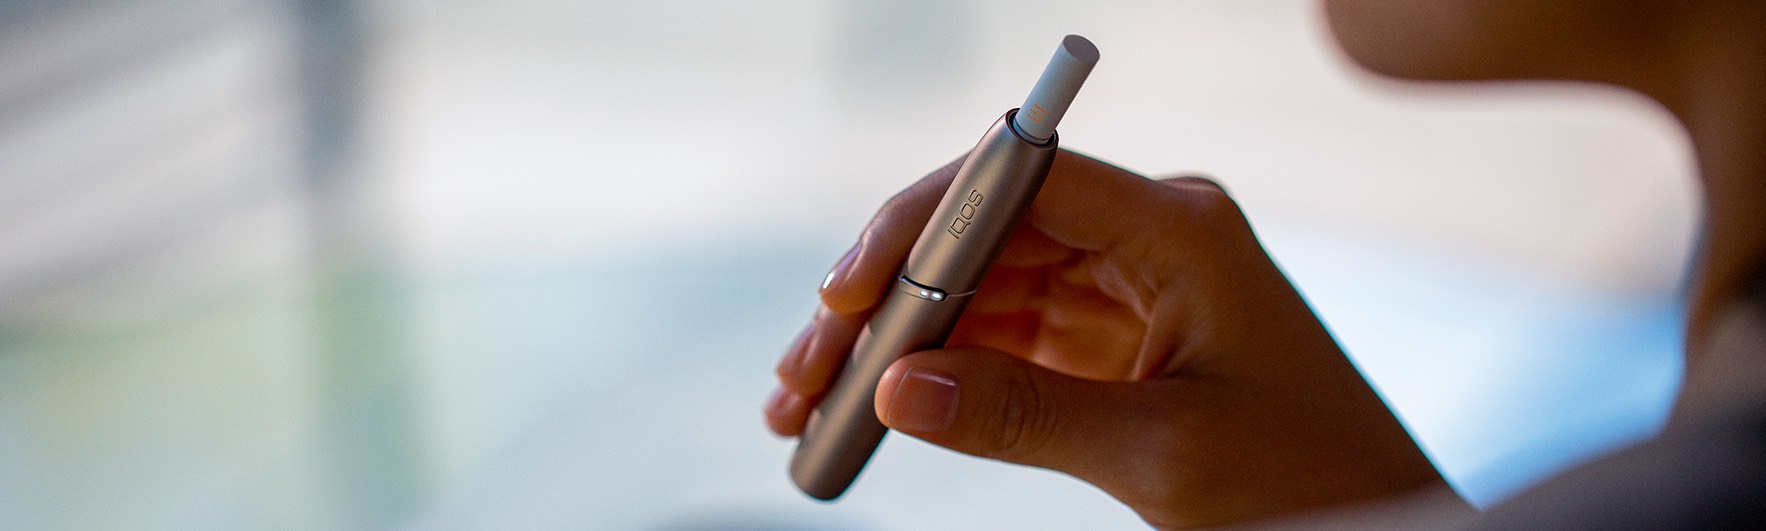 IQOS vs E-Cigarettes : What’s the difference ? – IQOS Switzerland 